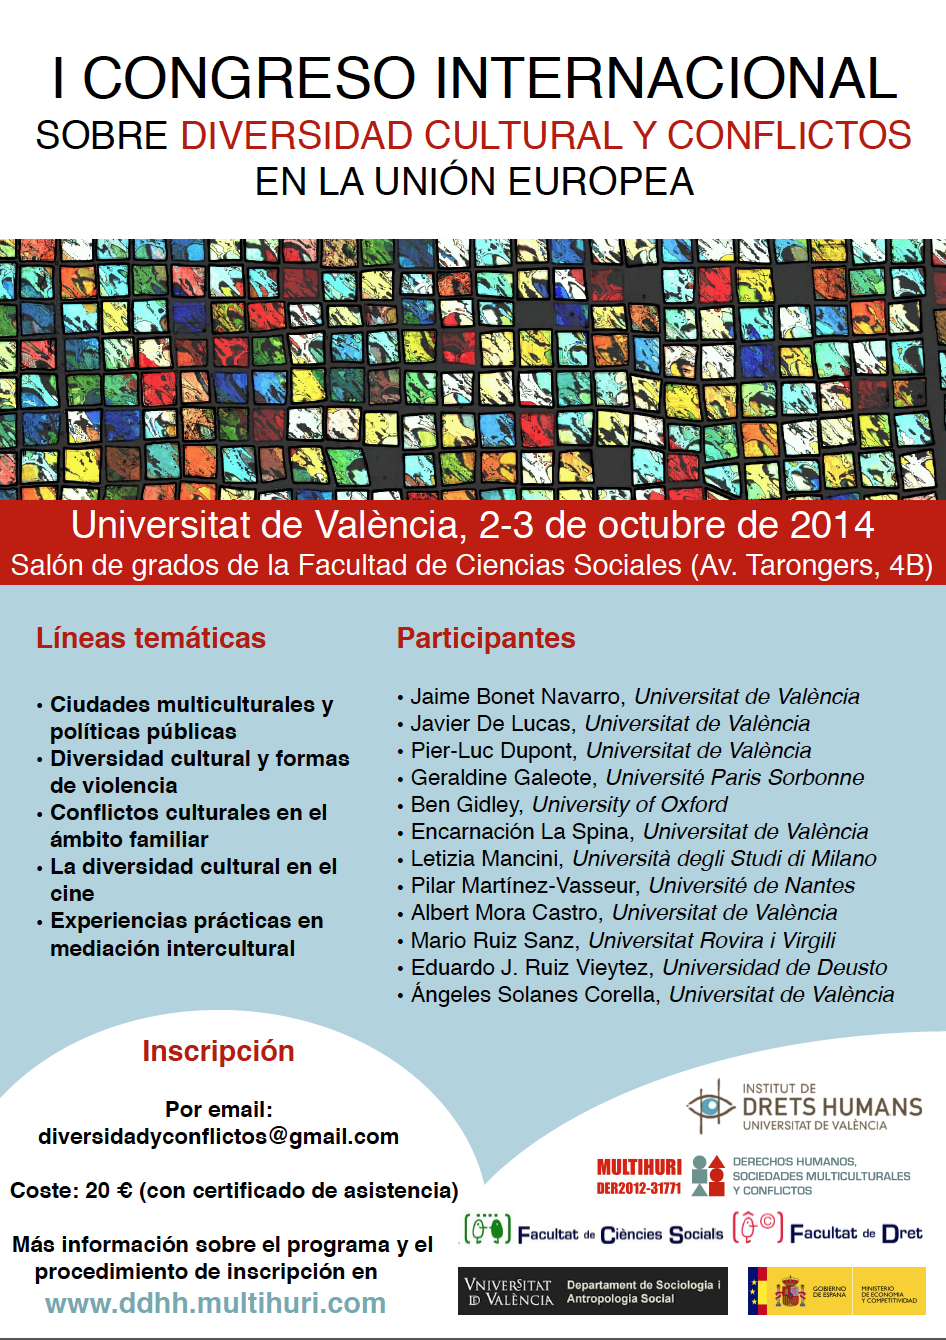 Poster of the Conference